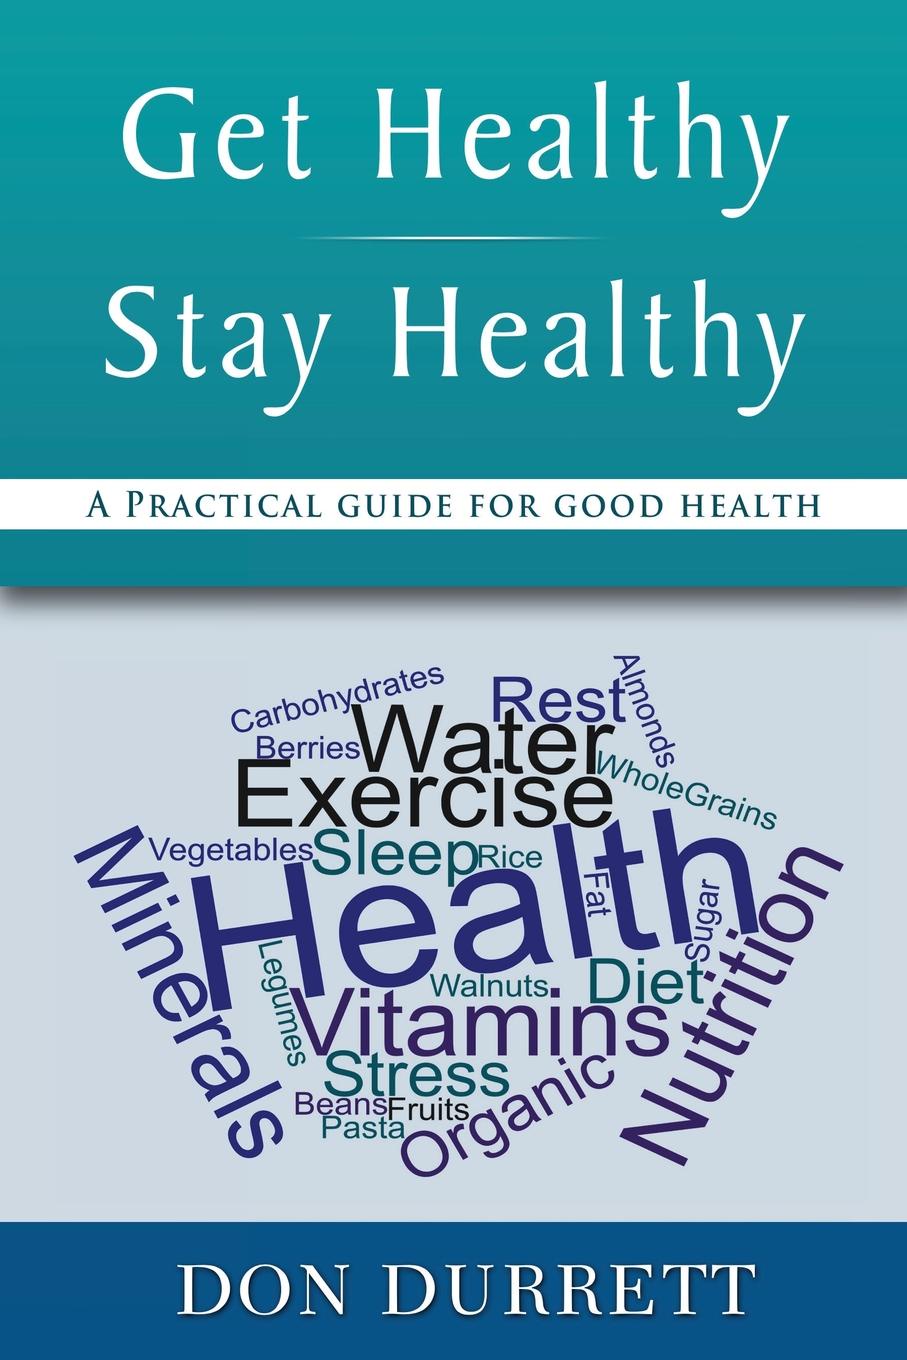 Get Healthy Stay Healthy. A Practical Guide for Good Health